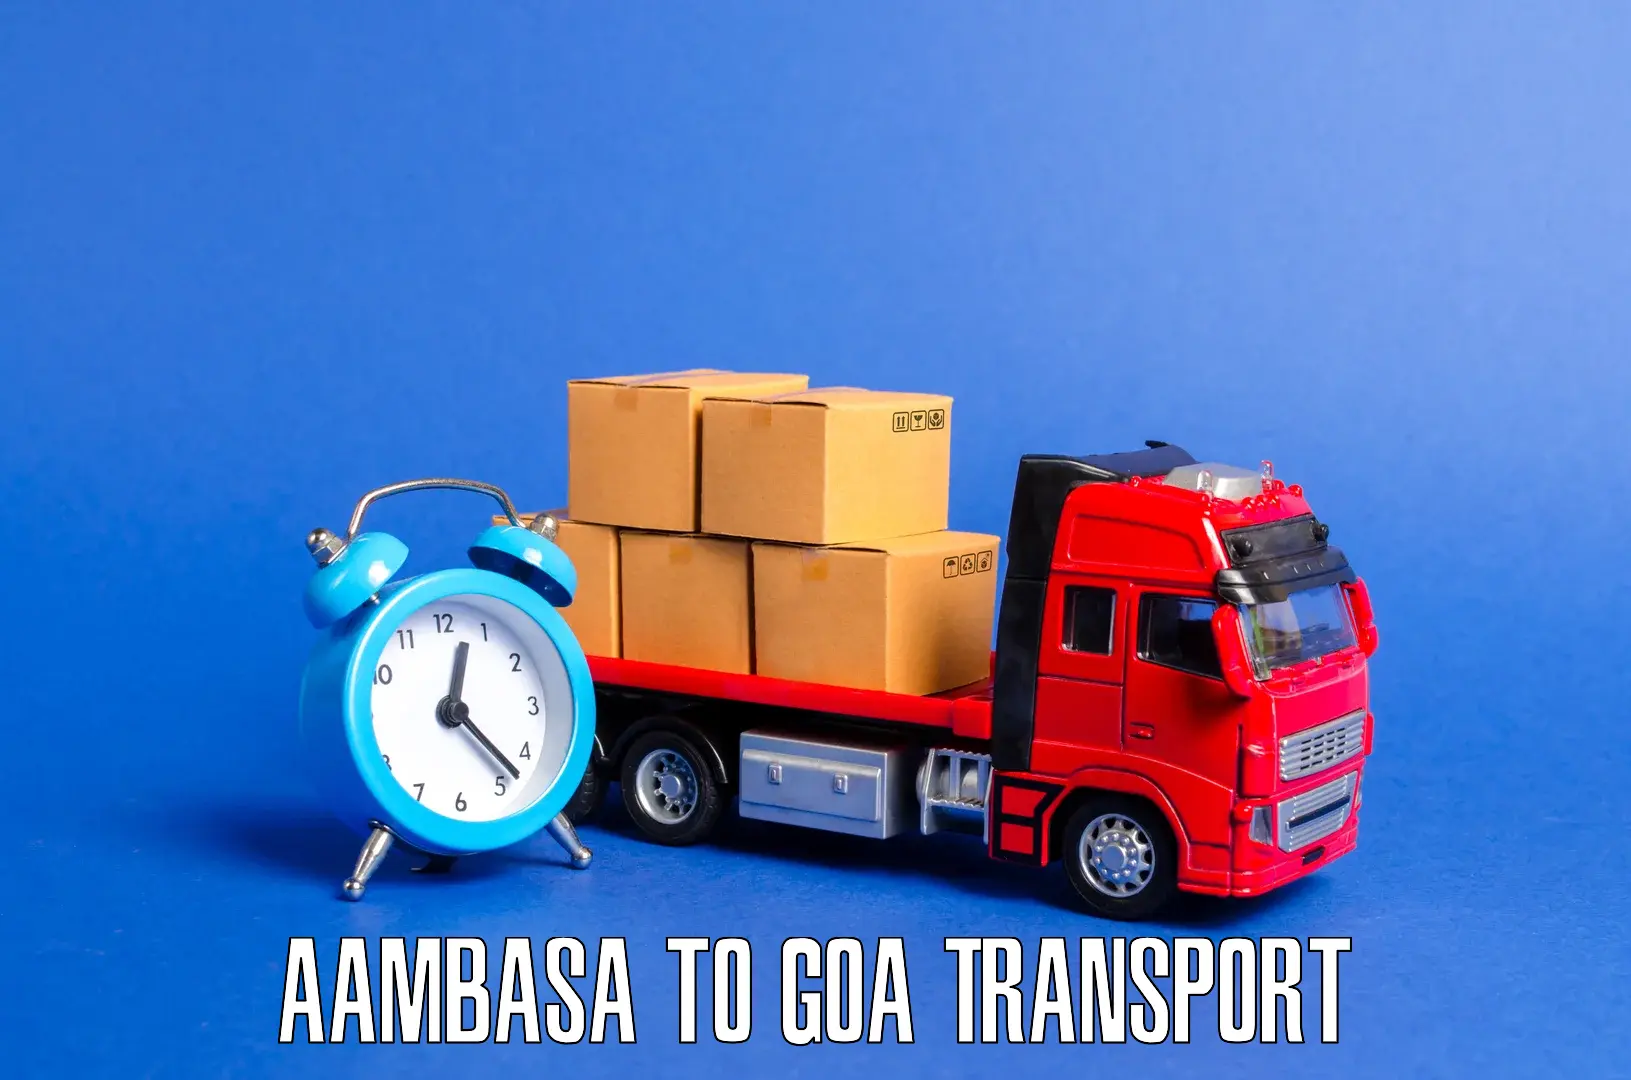 Transport bike from one state to another in Aambasa to Vasco da Gama